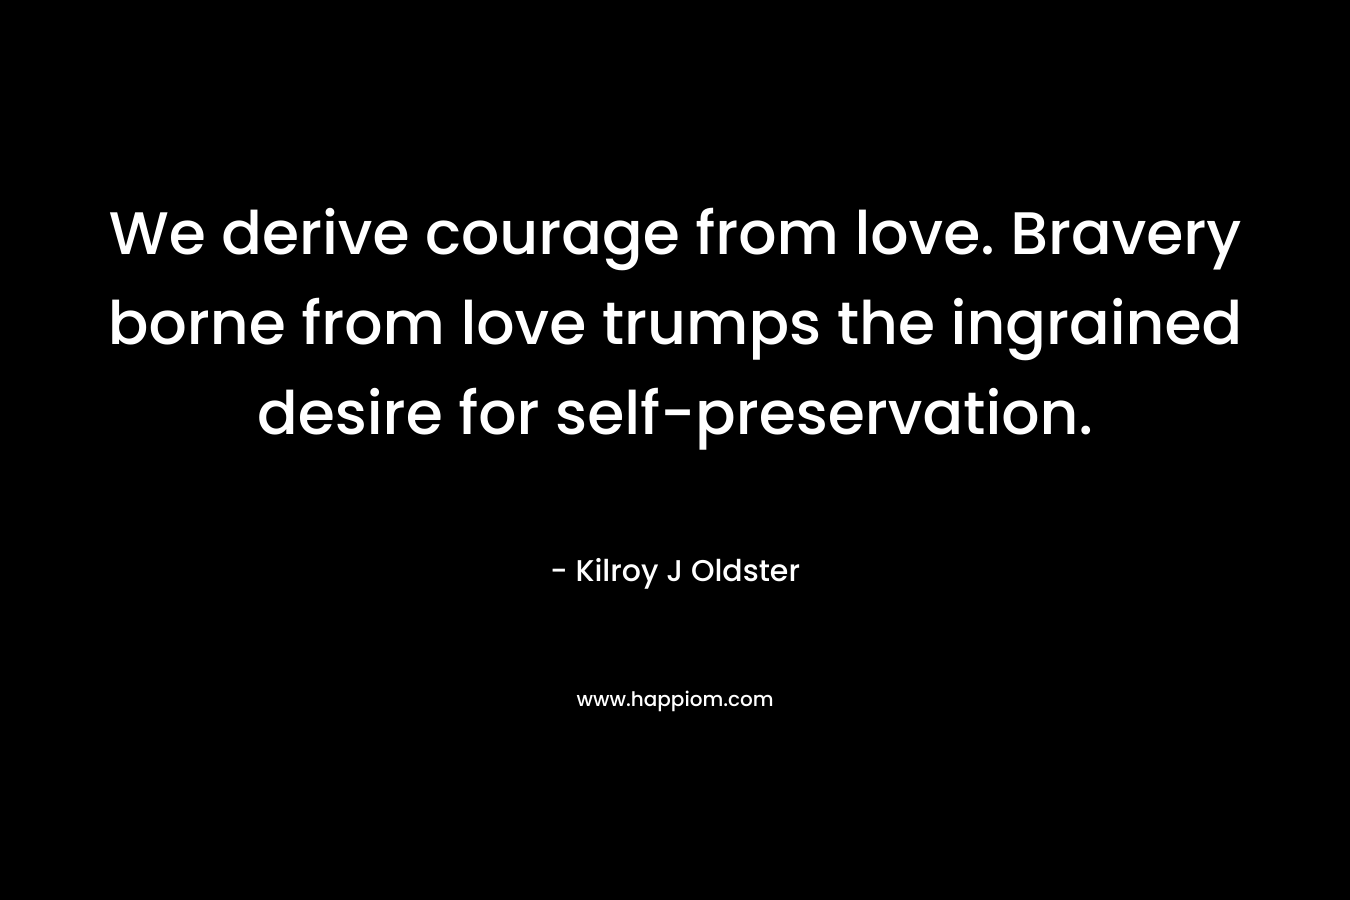 We derive courage from love. Bravery borne from love trumps the ingrained desire for self-preservation.